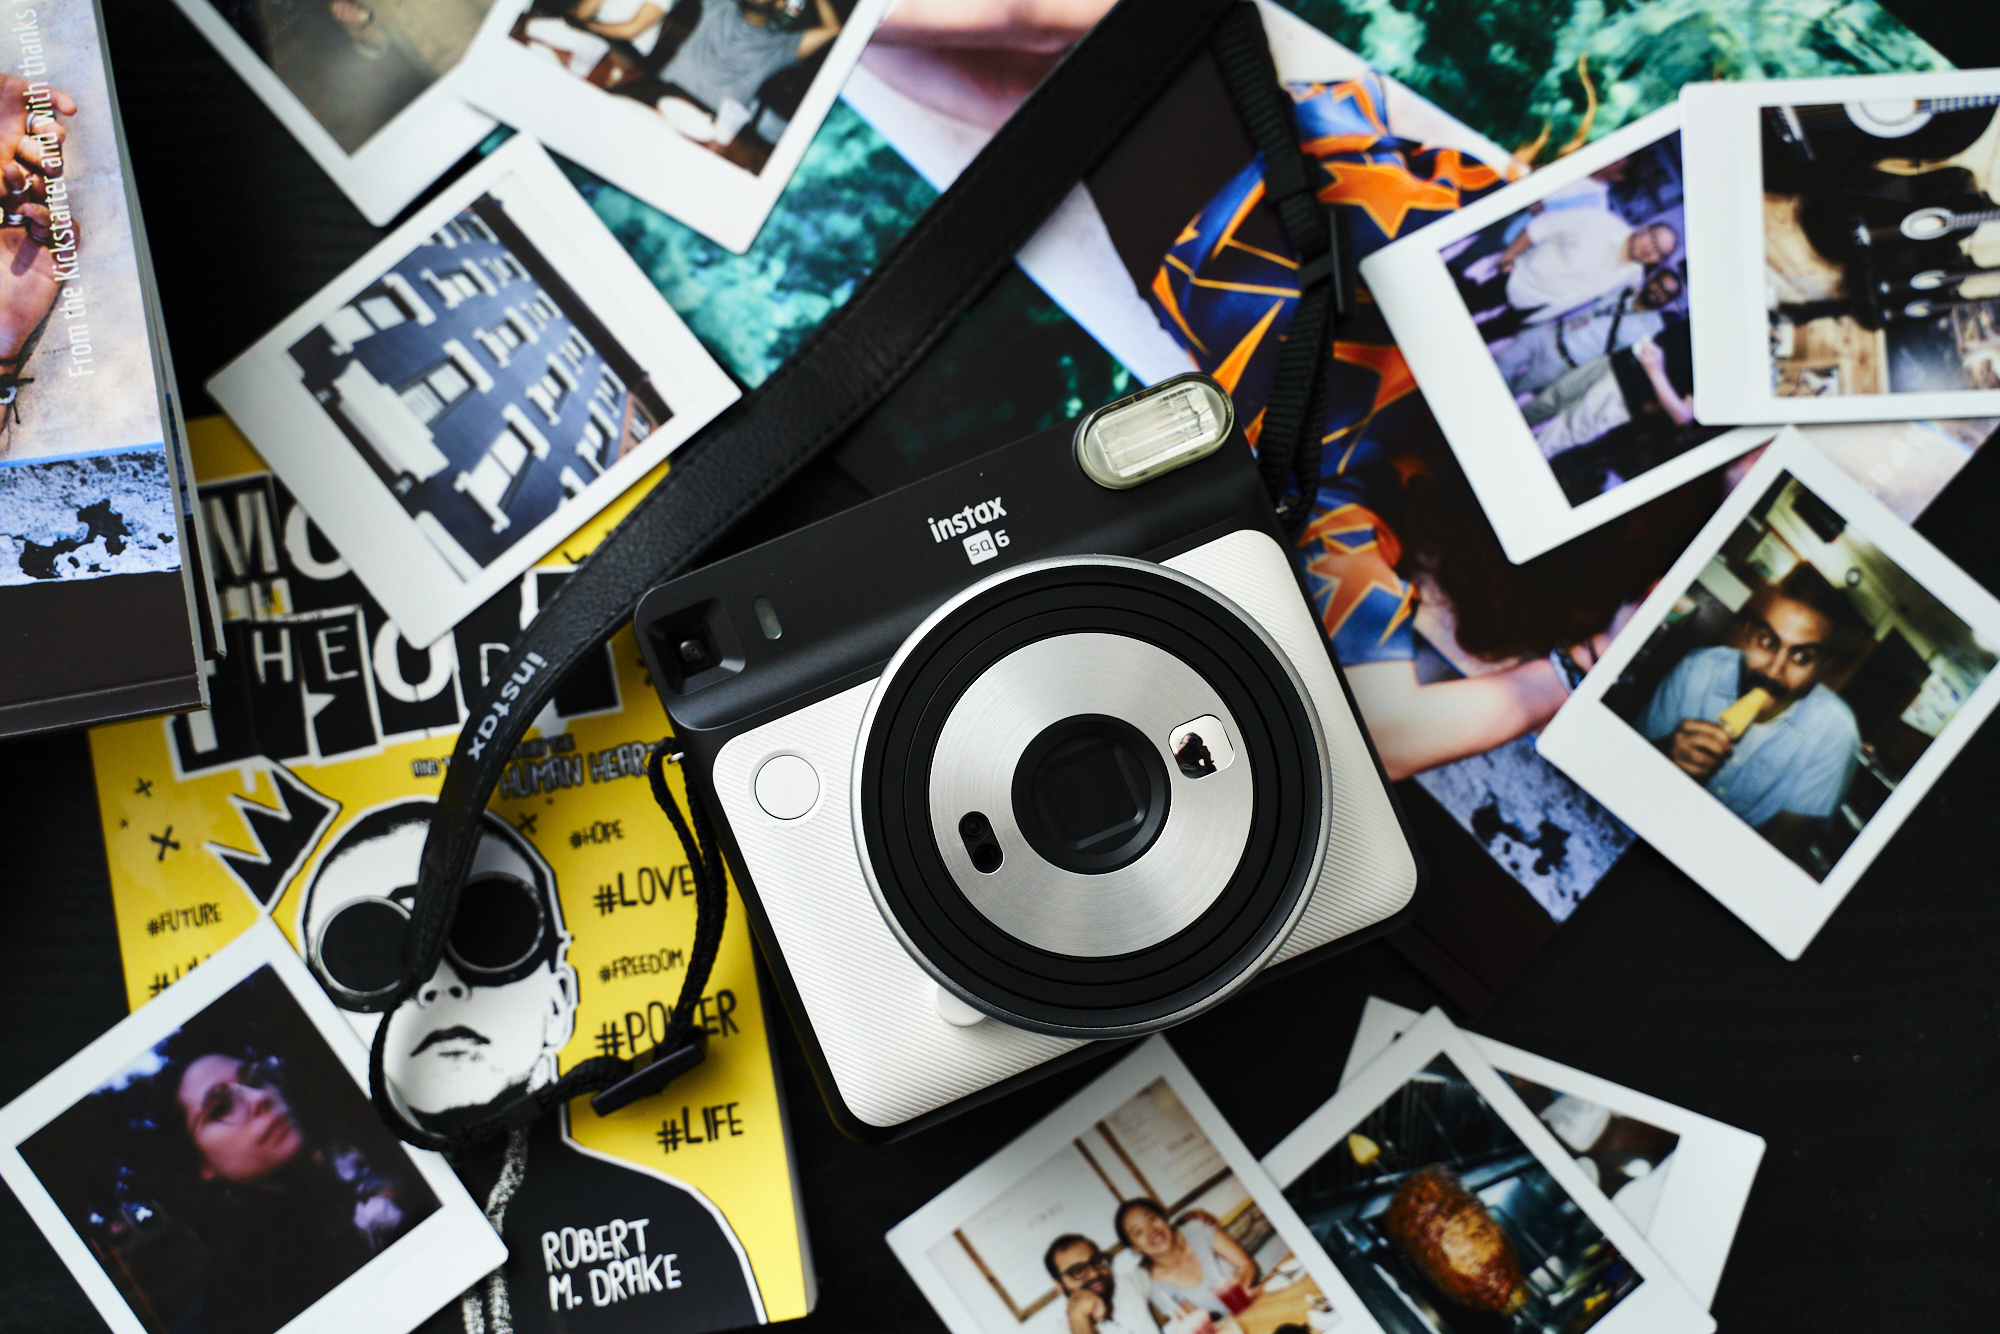 Instax Square SQ6 Review: Fujifilm's Best Instax Camera Yet - Tech